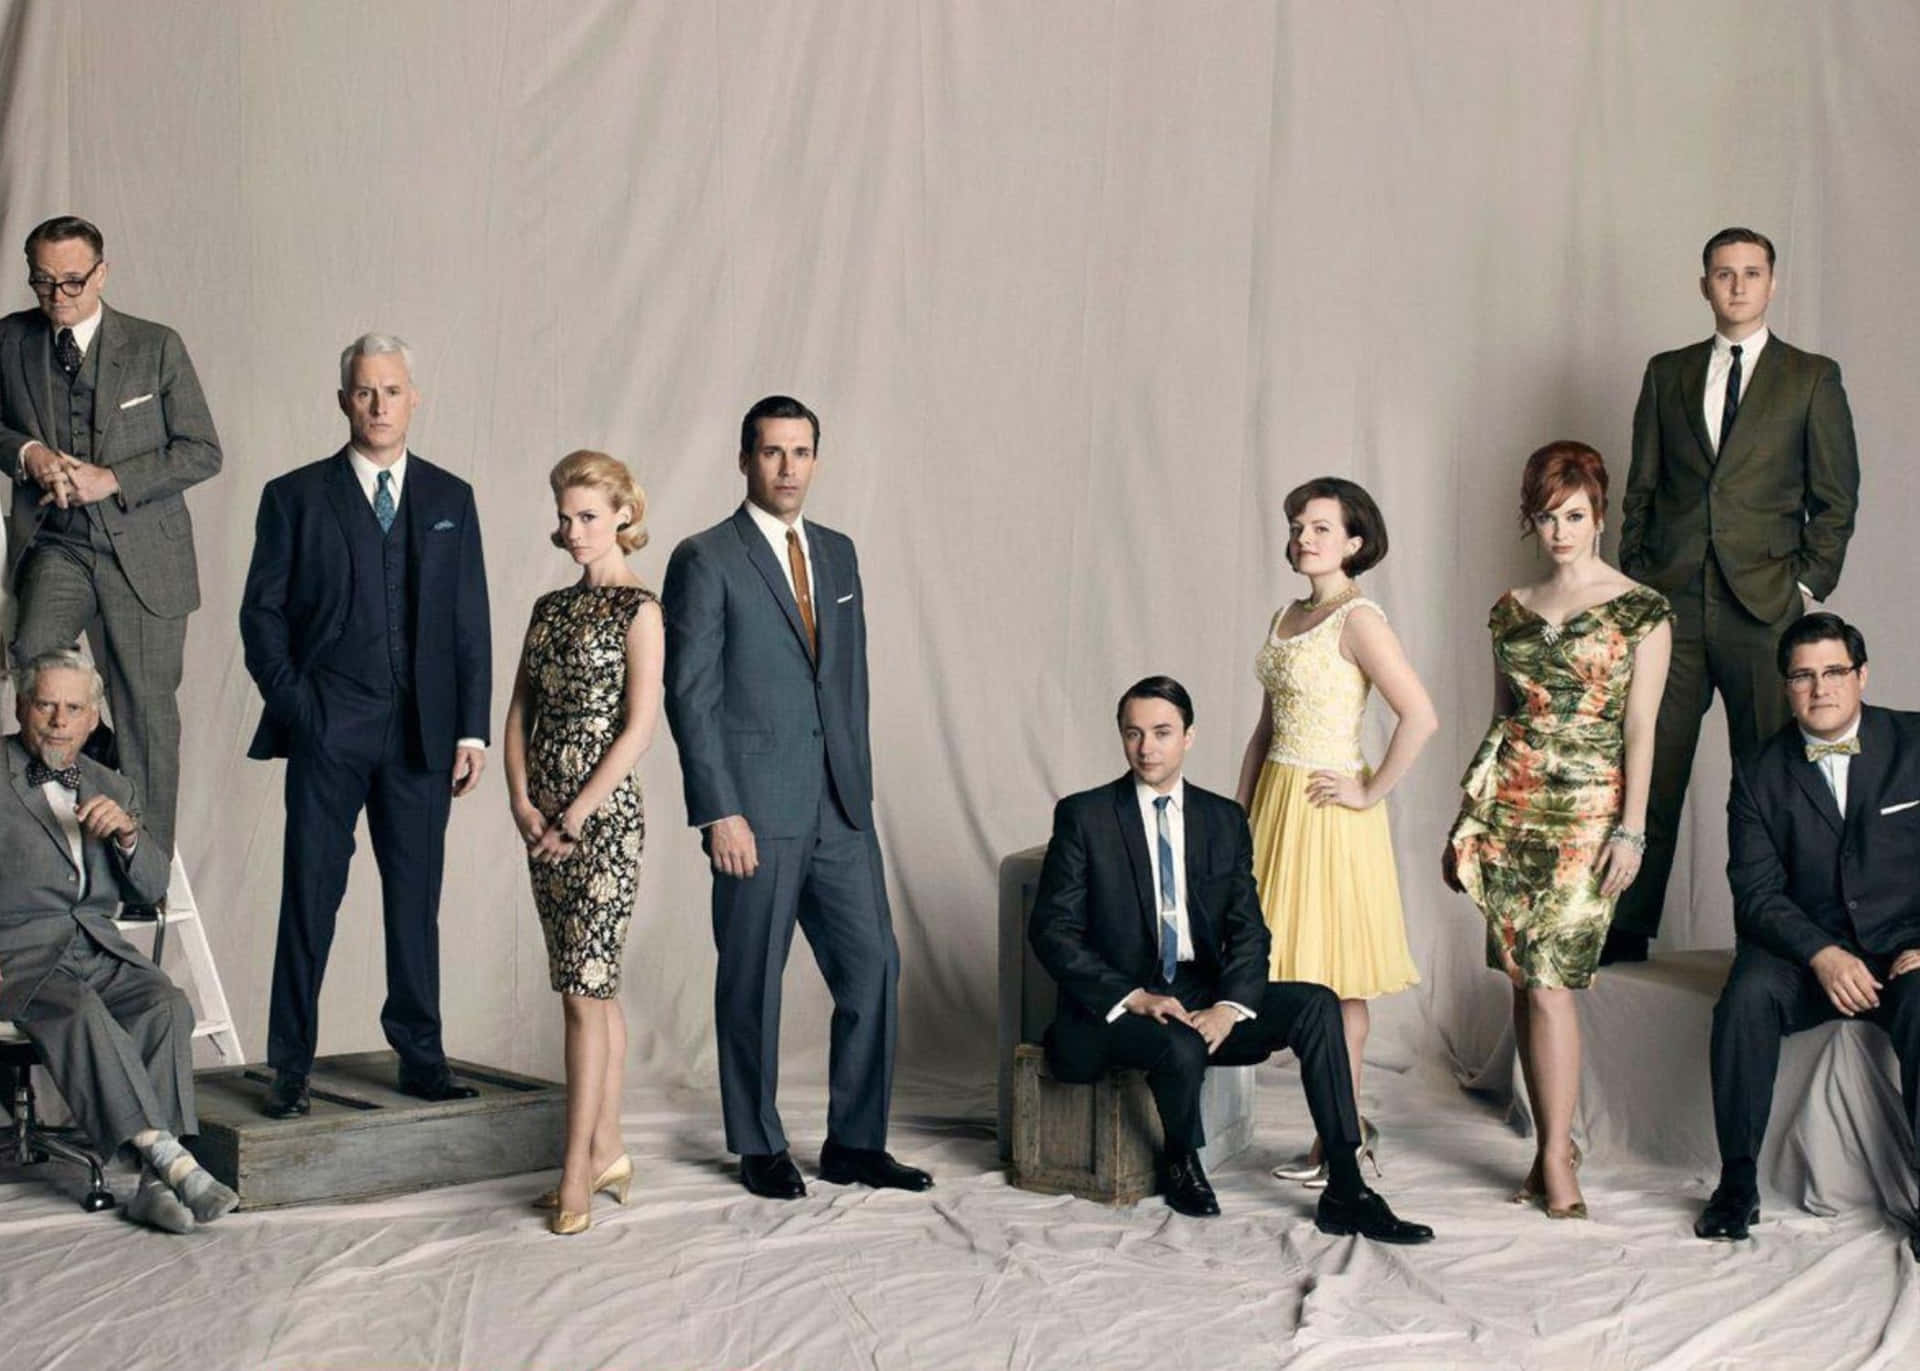 Caption: The Confluence Of Creativity And Commercialism: The Mad Men Squad. Wallpaper